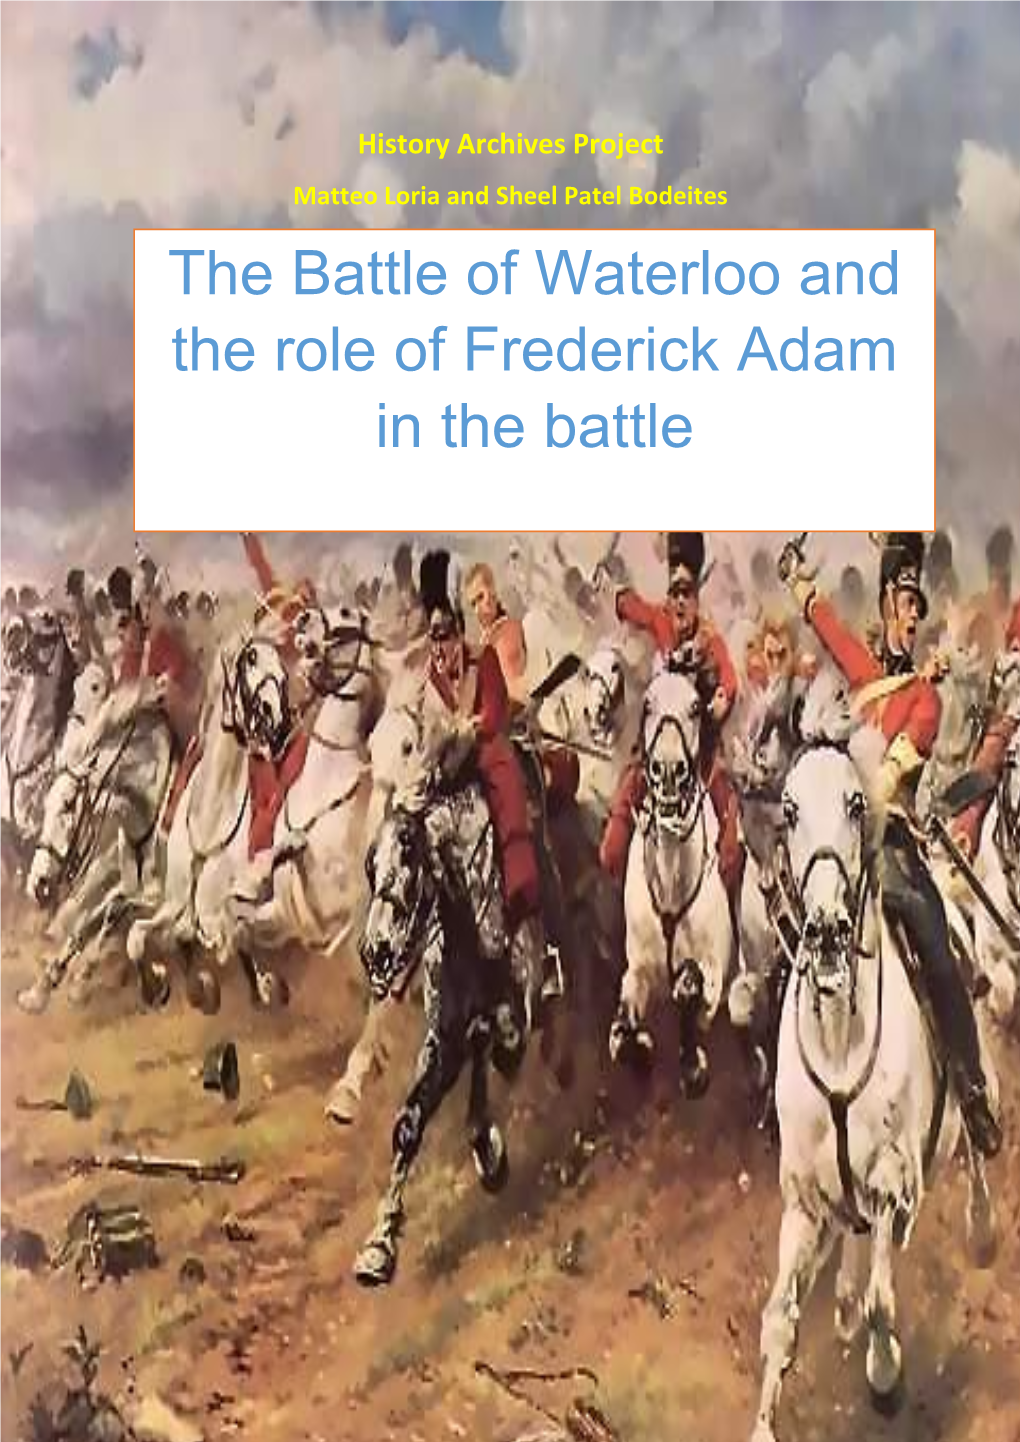 The Battle of Waterloo and the Role of Frederick Adam in the Battle